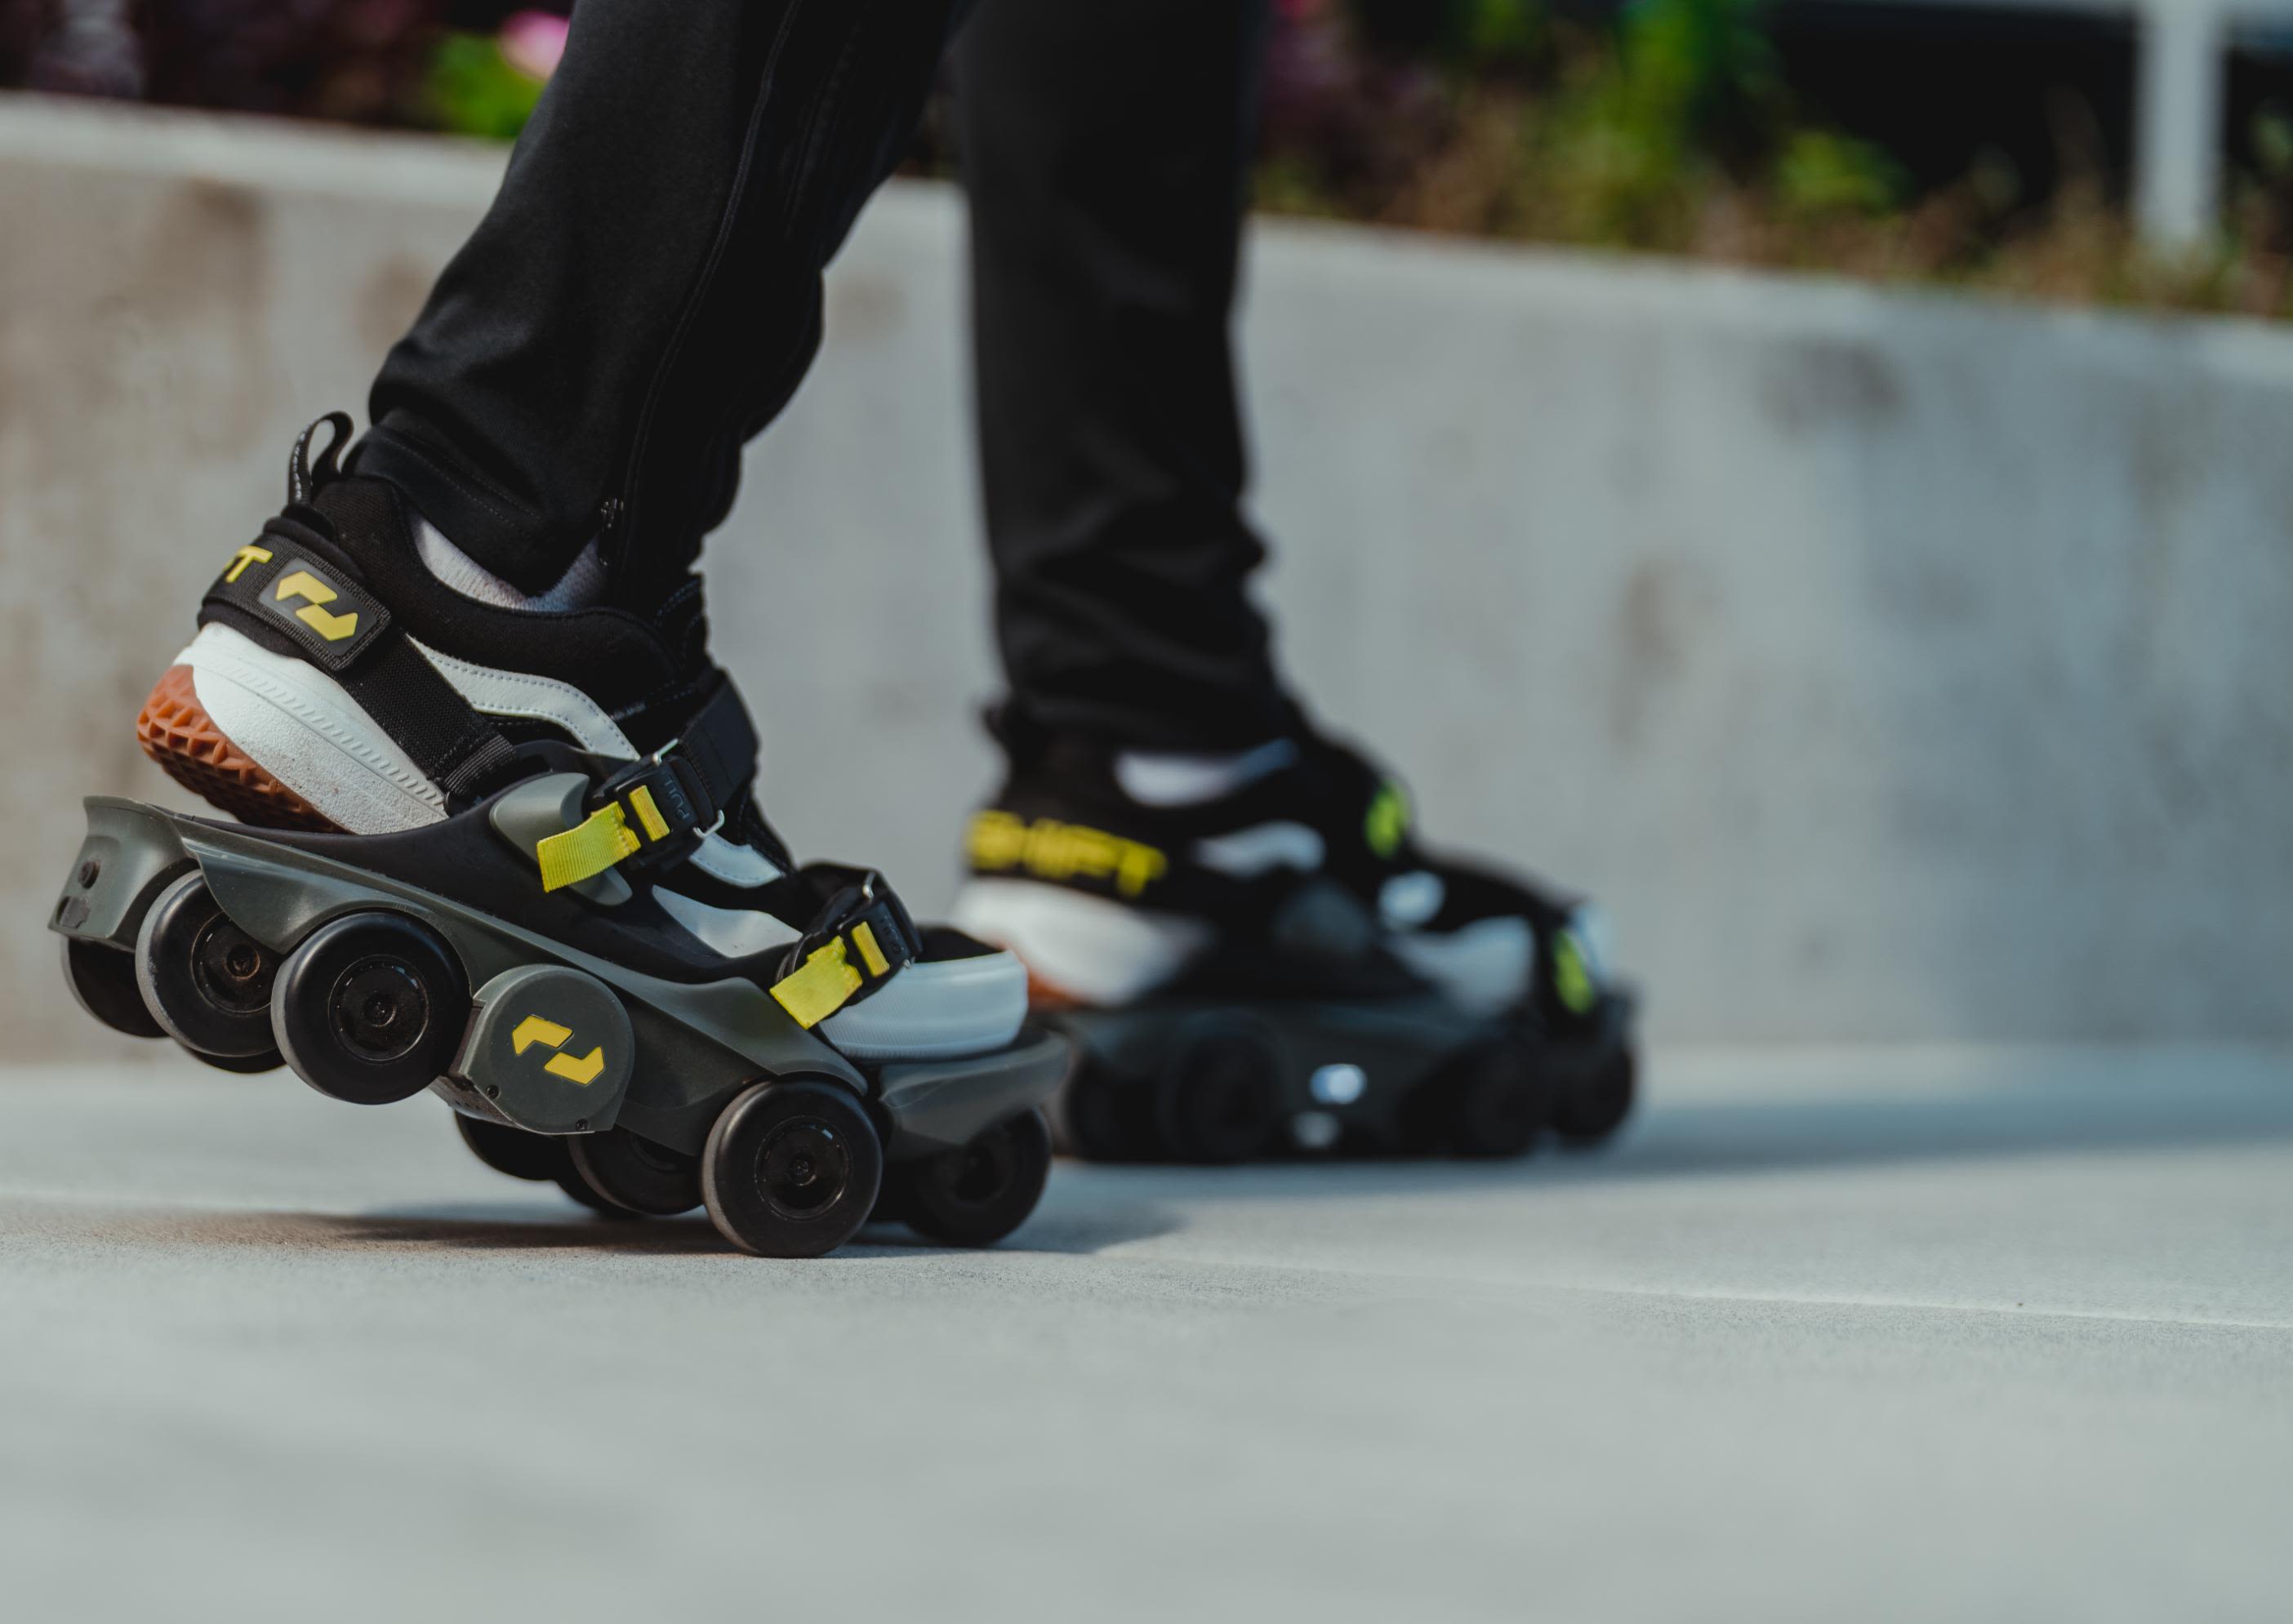 These battery-powered shoes make you walk 2.5 times faster